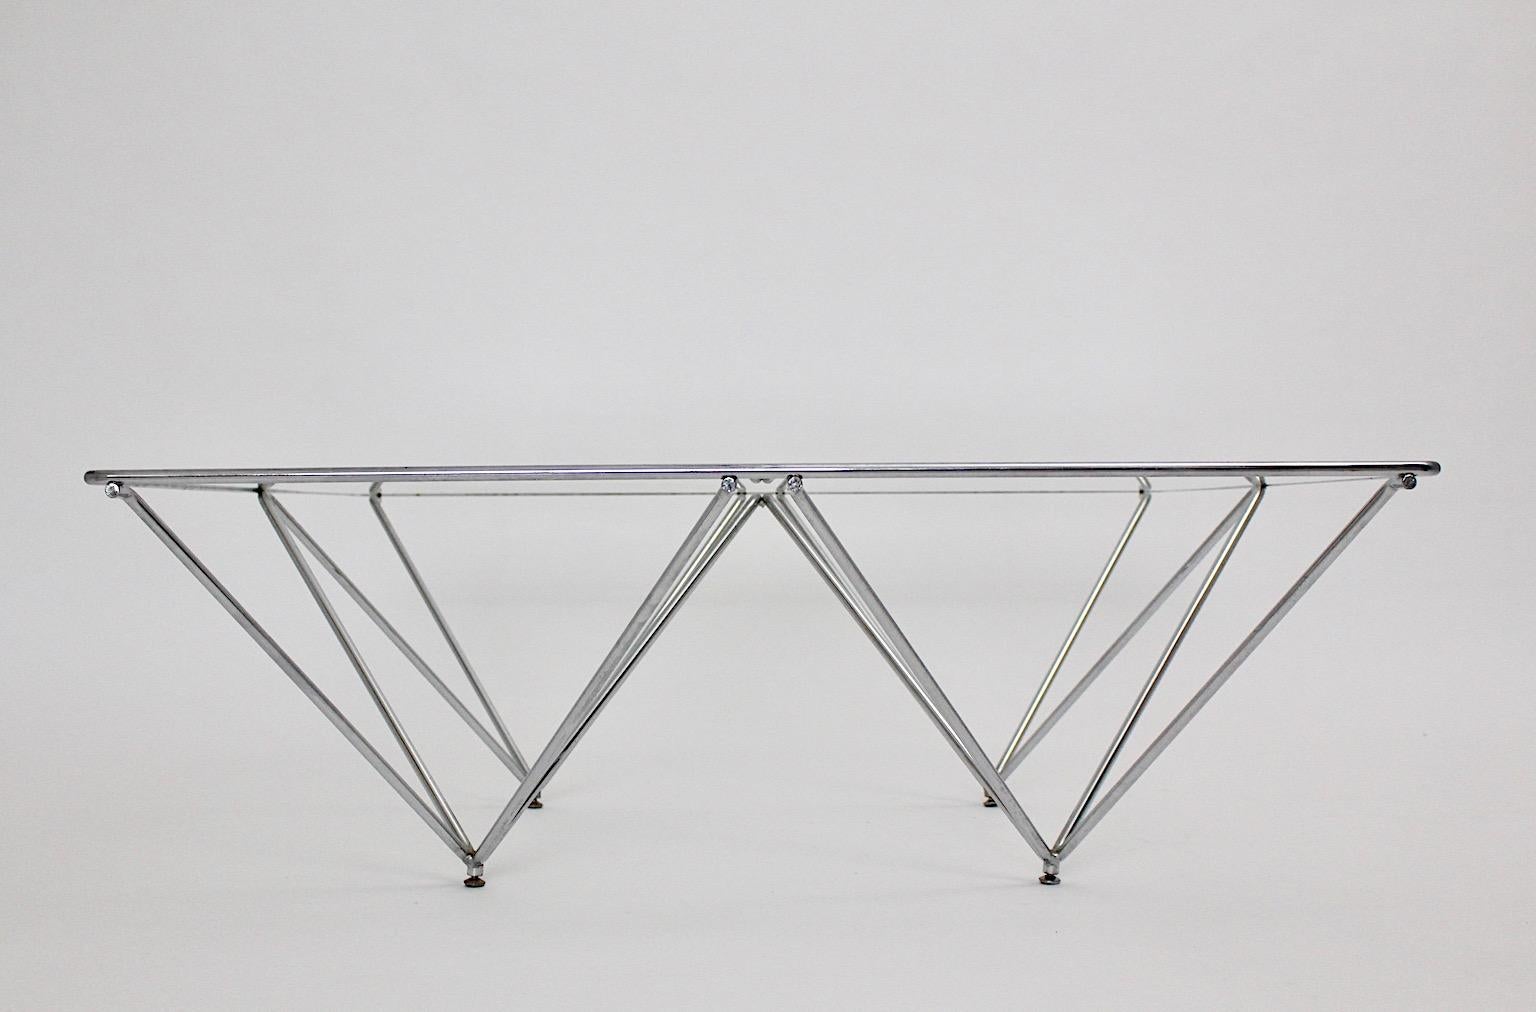 Modern vintage sofa table or coffee table from chromed metal tube steel and clear glass top 1980s Italy.
The chromed tube steel construction shows sleek design and adds a touch of coolness.
Very good condition
approx. measures:
Width: 100